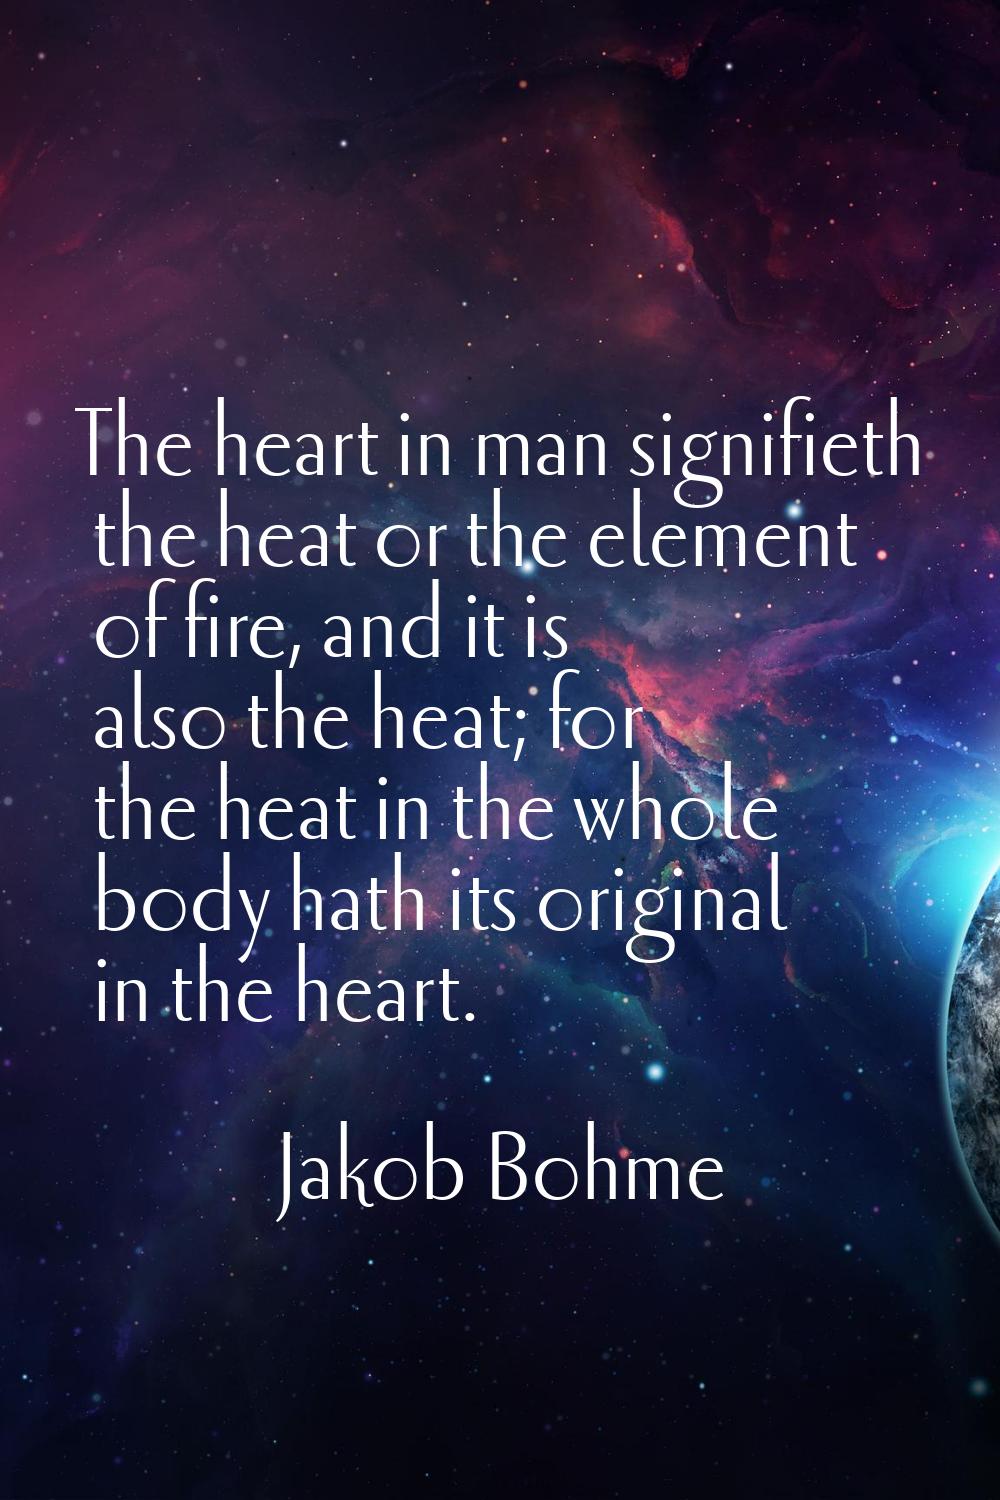 The heart in man signifieth the heat or the element of fire, and it is also the heat; for the heat 